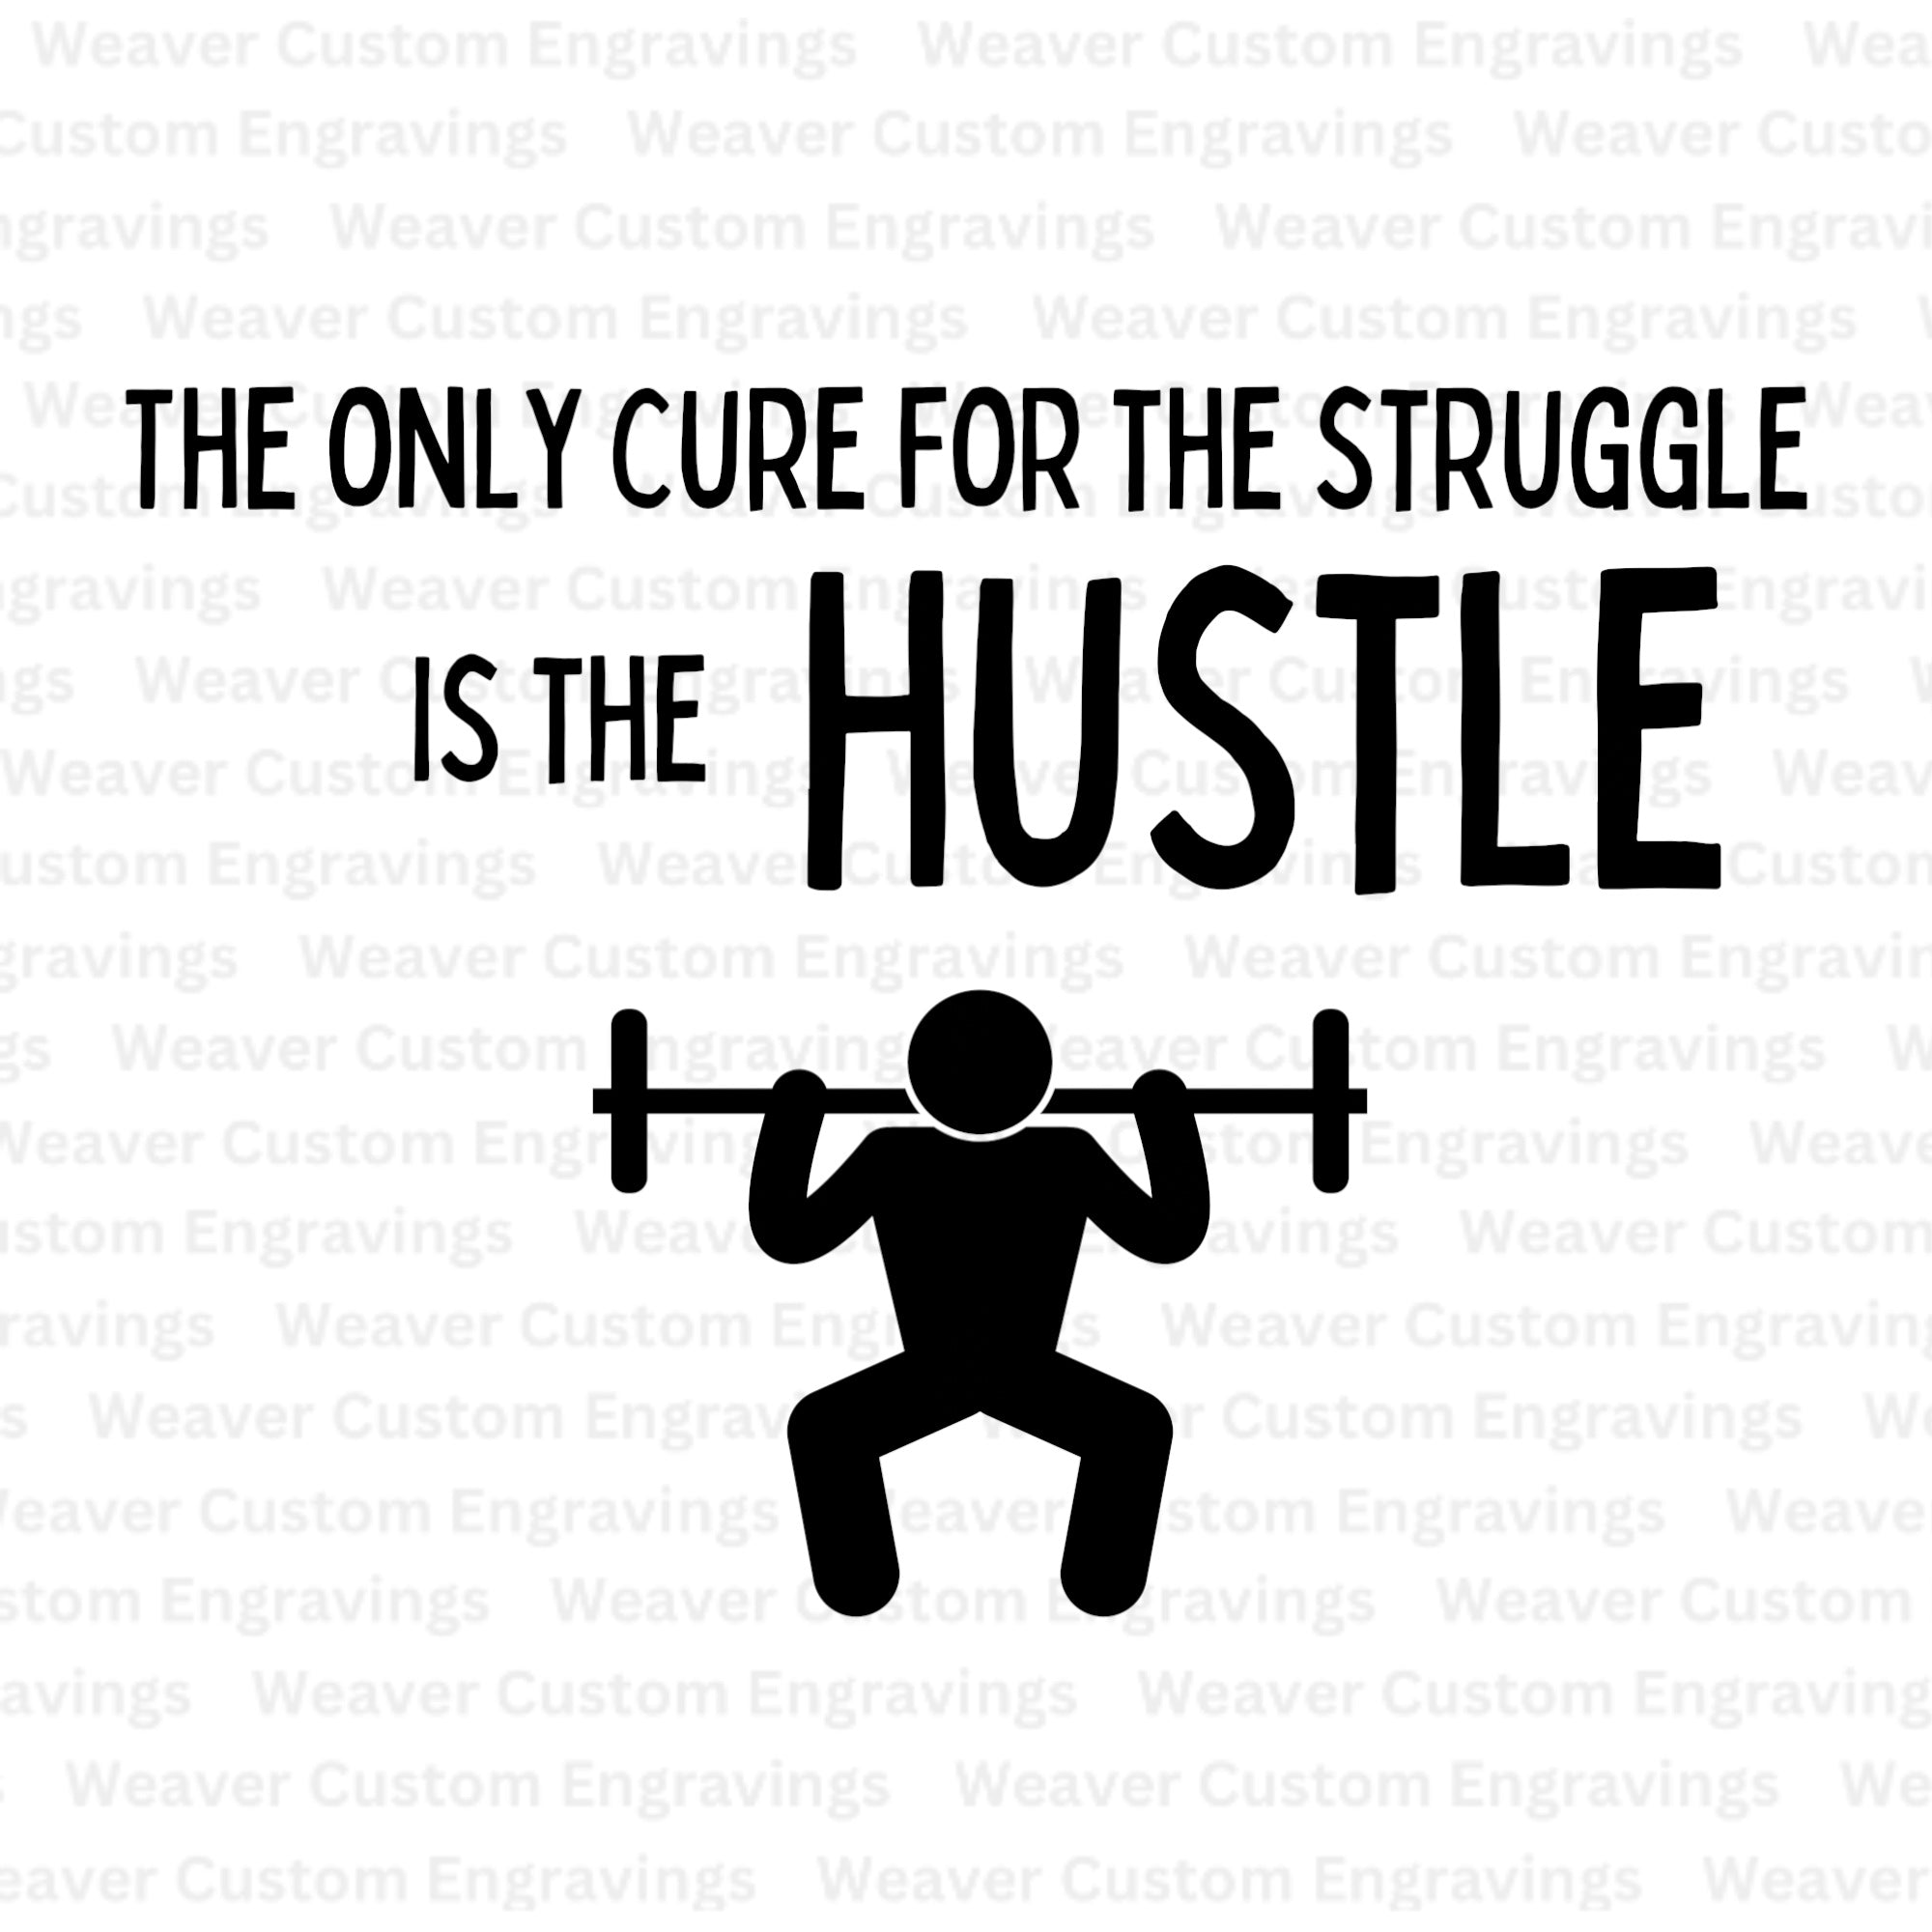 Harness the Power of Perseverance with &#8216;The Only Cure for the Struggle is the Hustle&#8217; Digital Design!